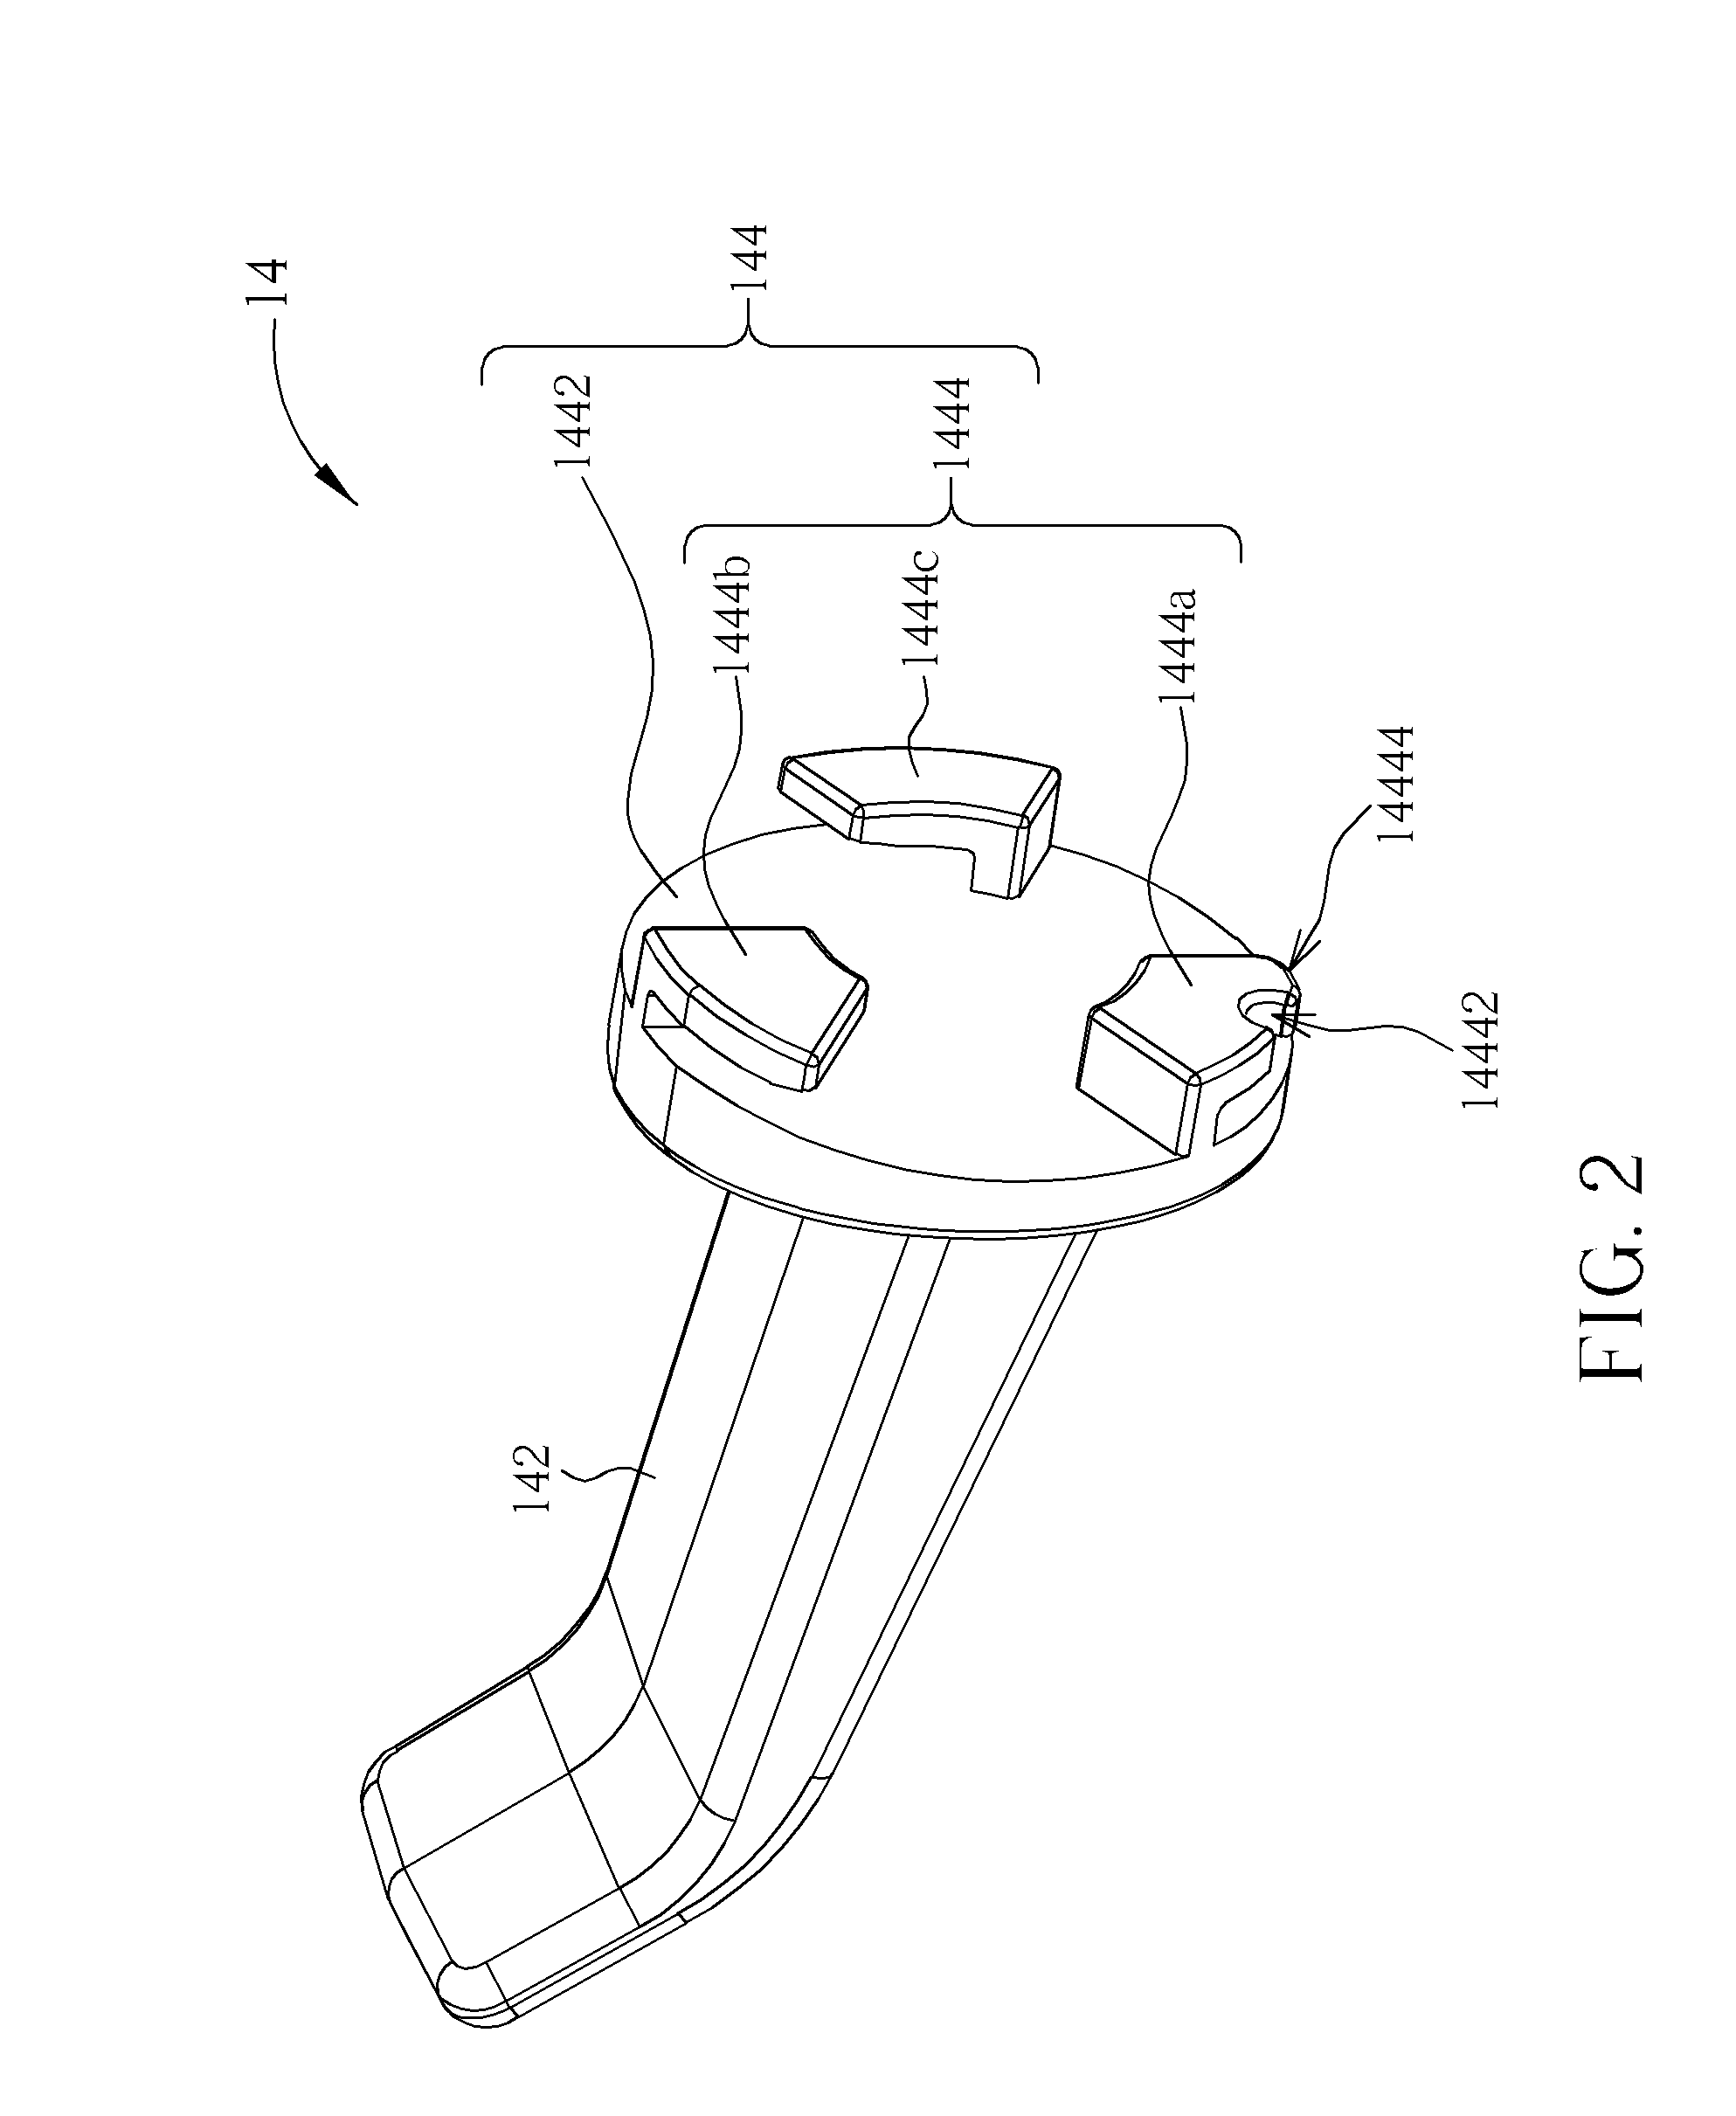 Detachable hanger and supporting stand with hanger